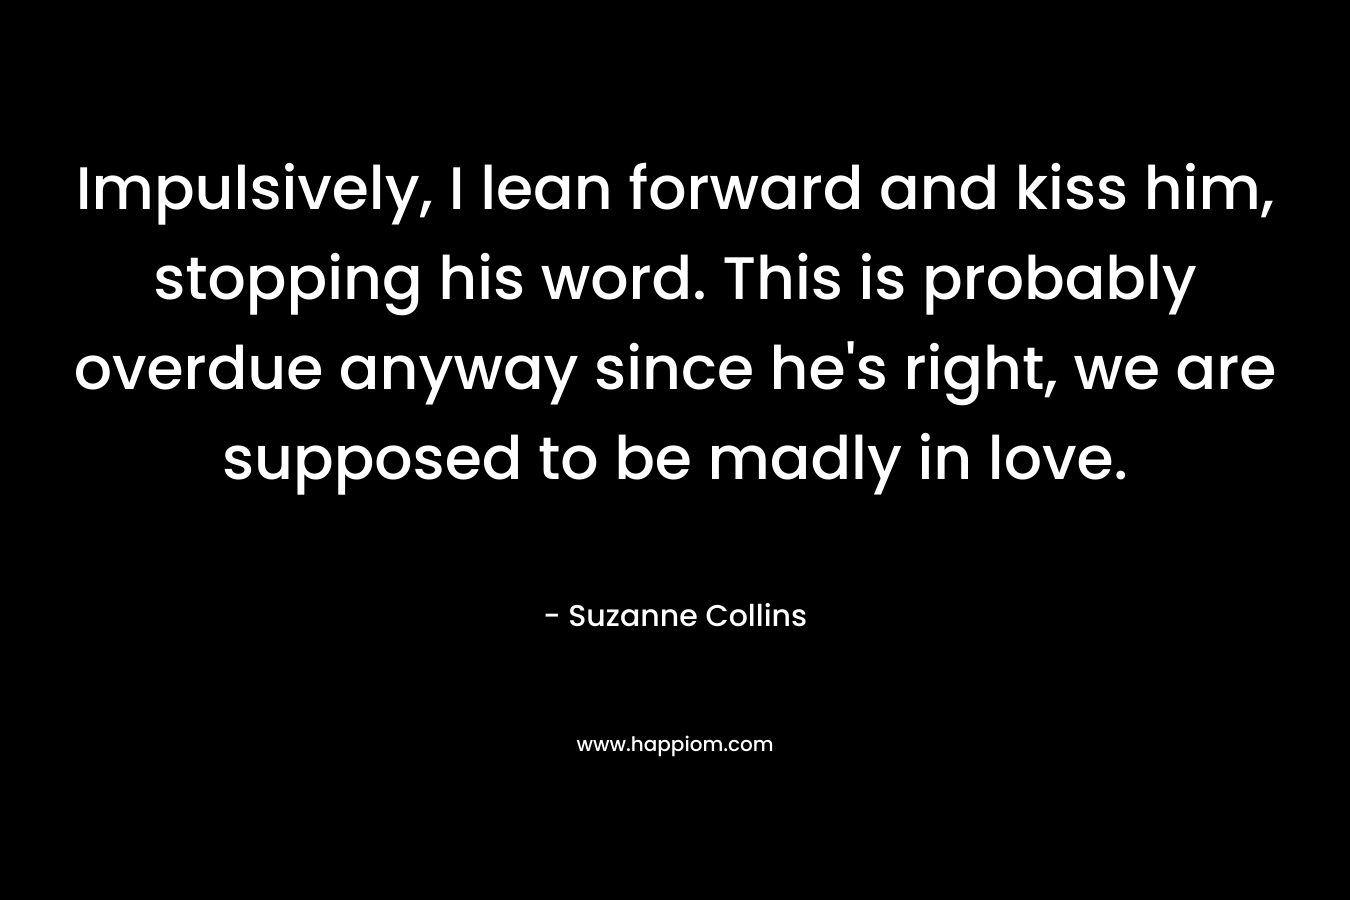 Impulsively, I lean forward and kiss him, stopping his word. This is probably overdue anyway since he’s right, we are supposed to be madly in love. – Suzanne Collins